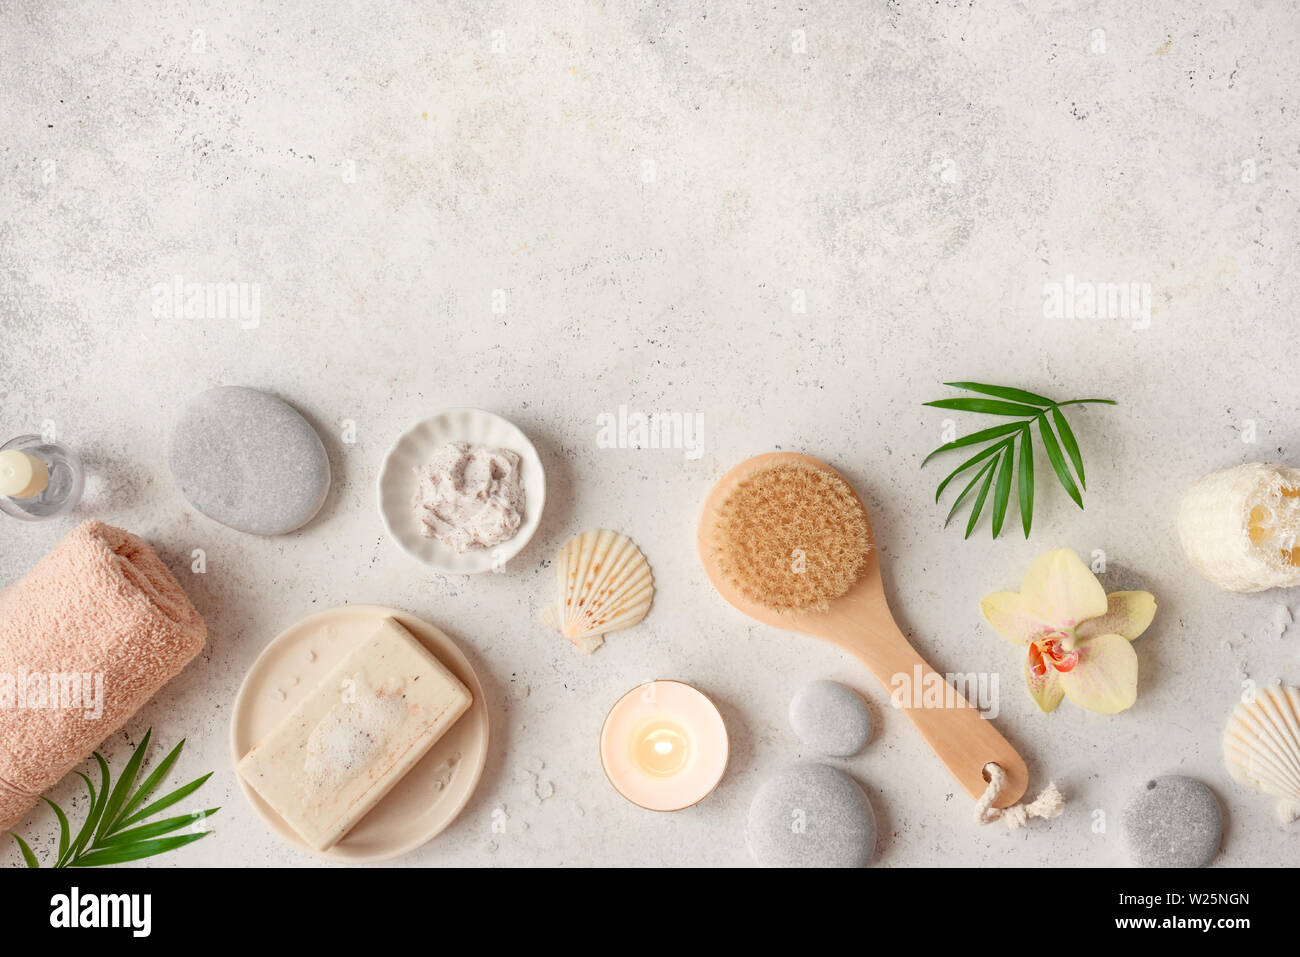 Spa concept, flat lay on white stone background, palm leaves, flower, candle and zen like grey stones, top view. Stock Photo